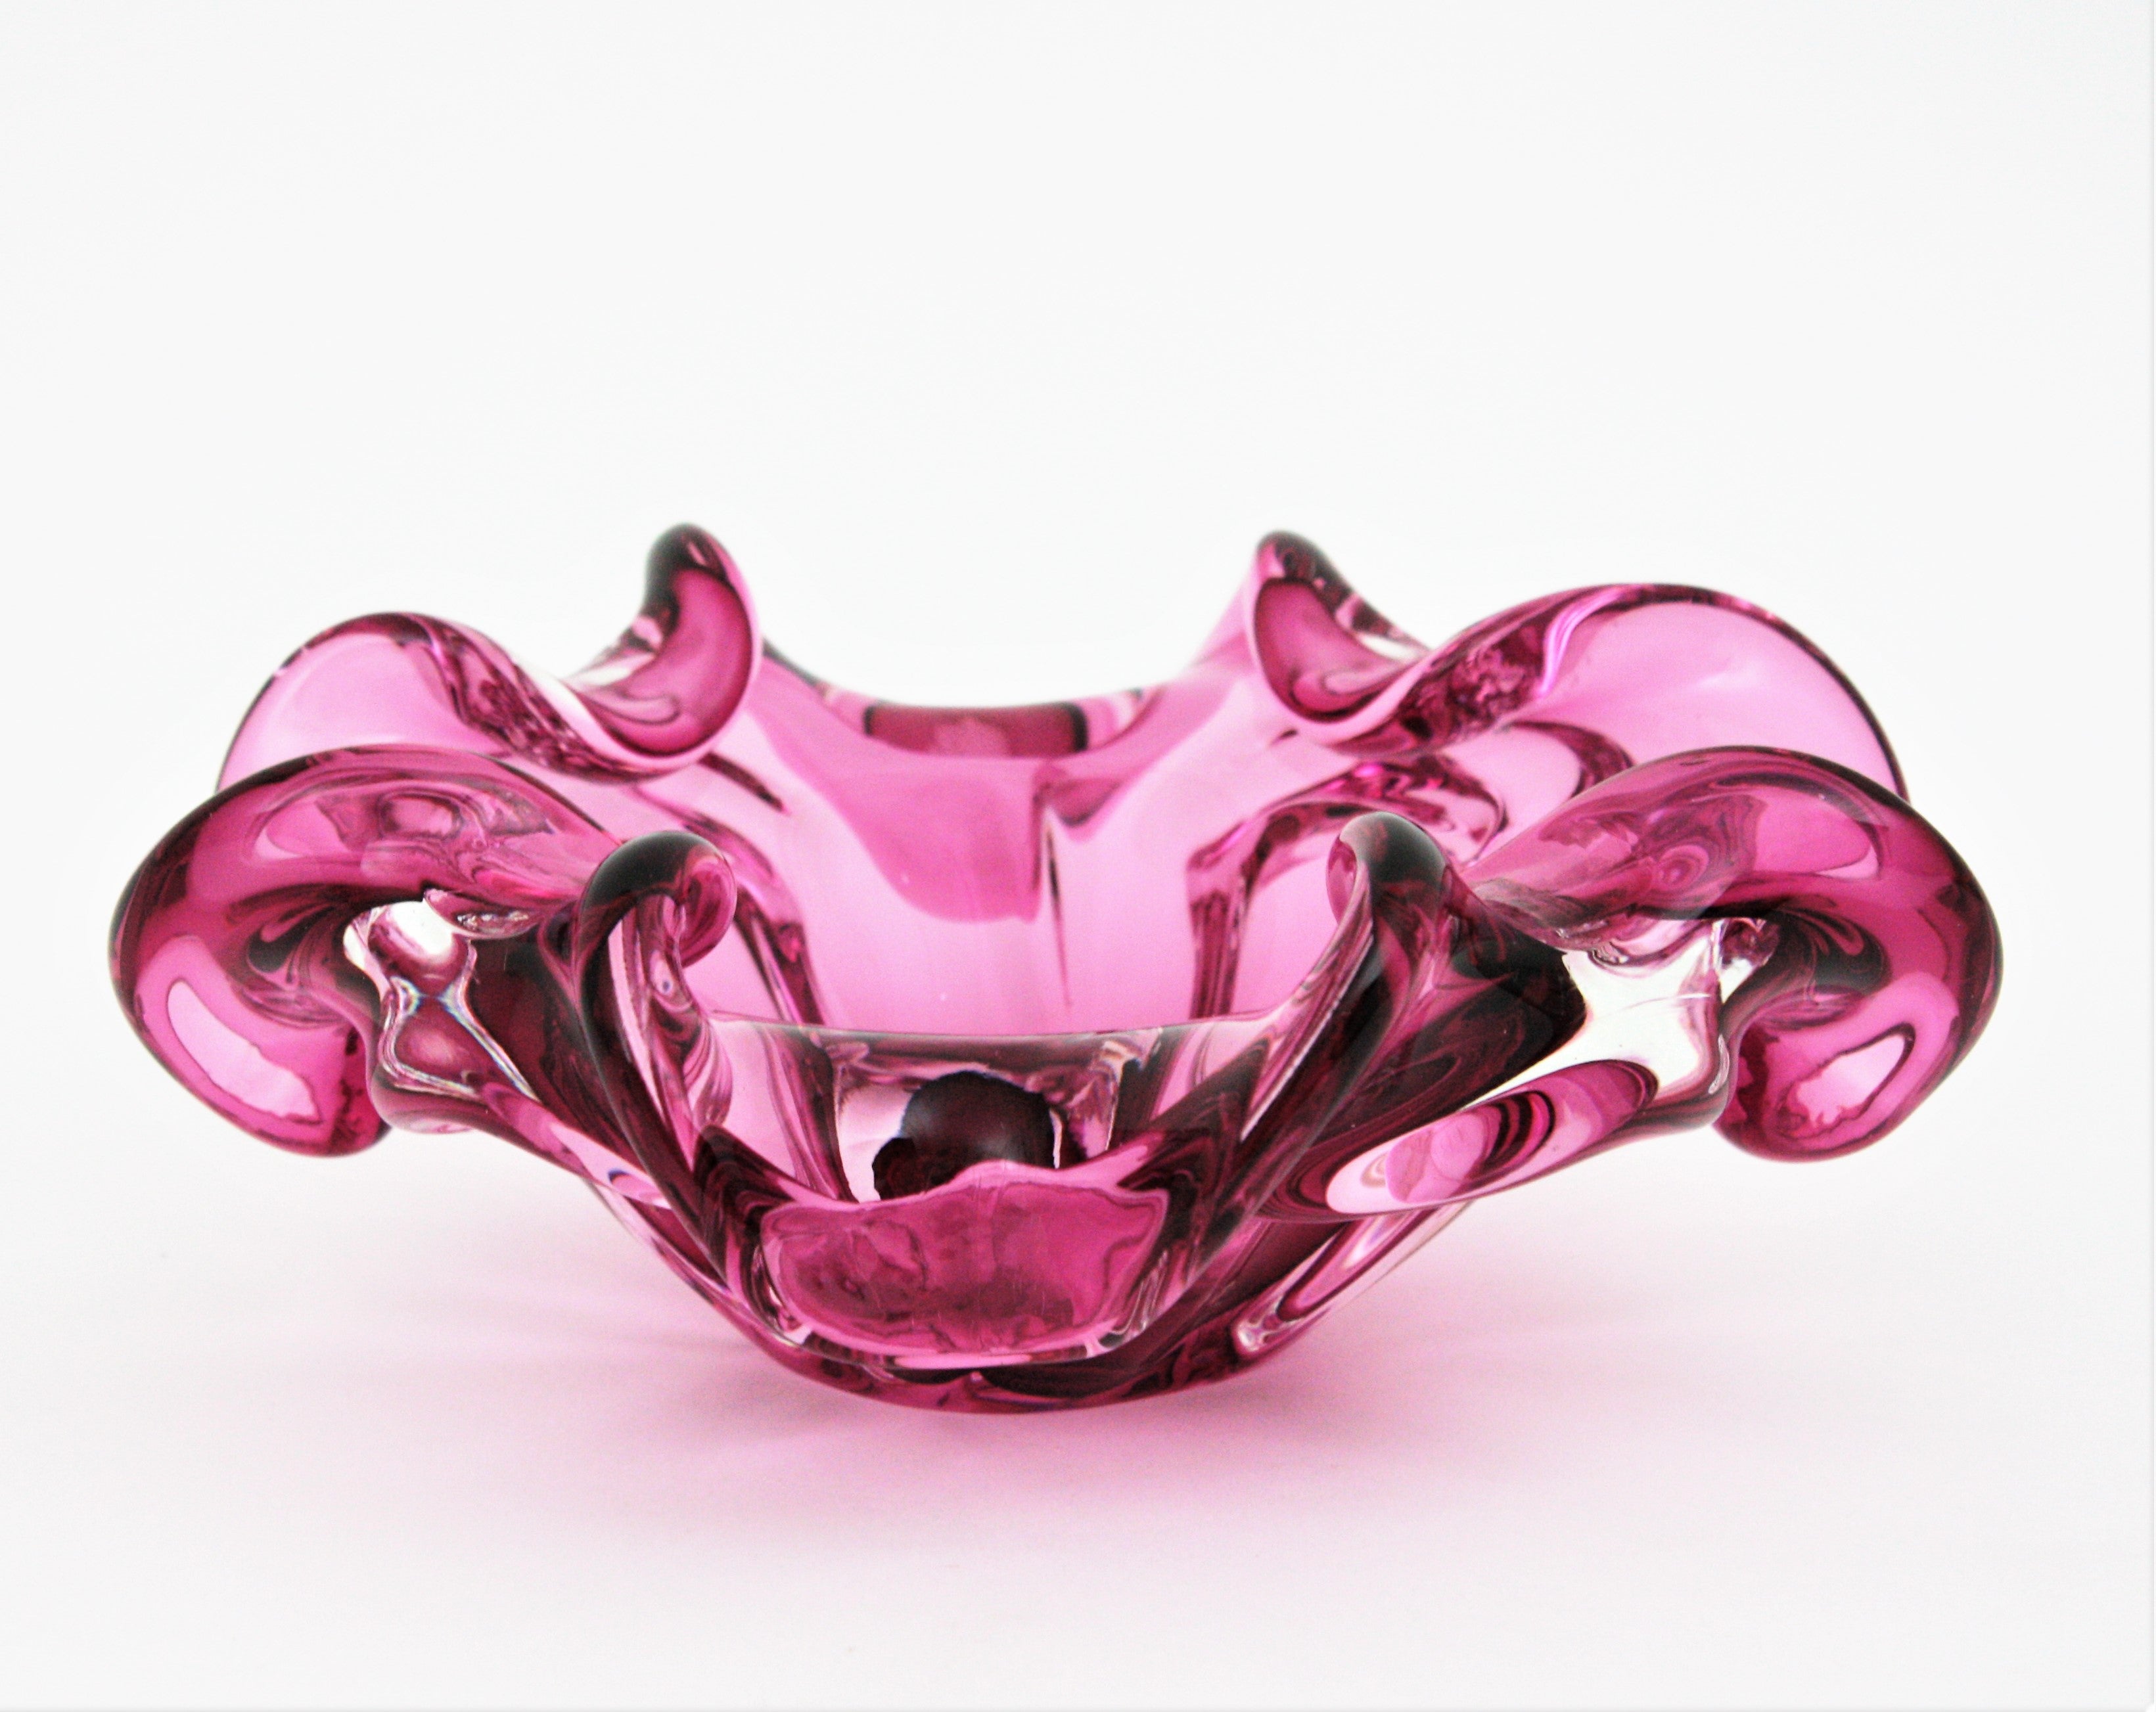 Murano Art Glass bowl, ashtray or vide-poche, Italy 1950s-1960s.
Attributed to Seguso Vetri d'Arte.
Pink and clear glass.
Gorgeous handblown Murano flower shaped bowl in pink and clear glass. Pink glass submerged into clear glass using the